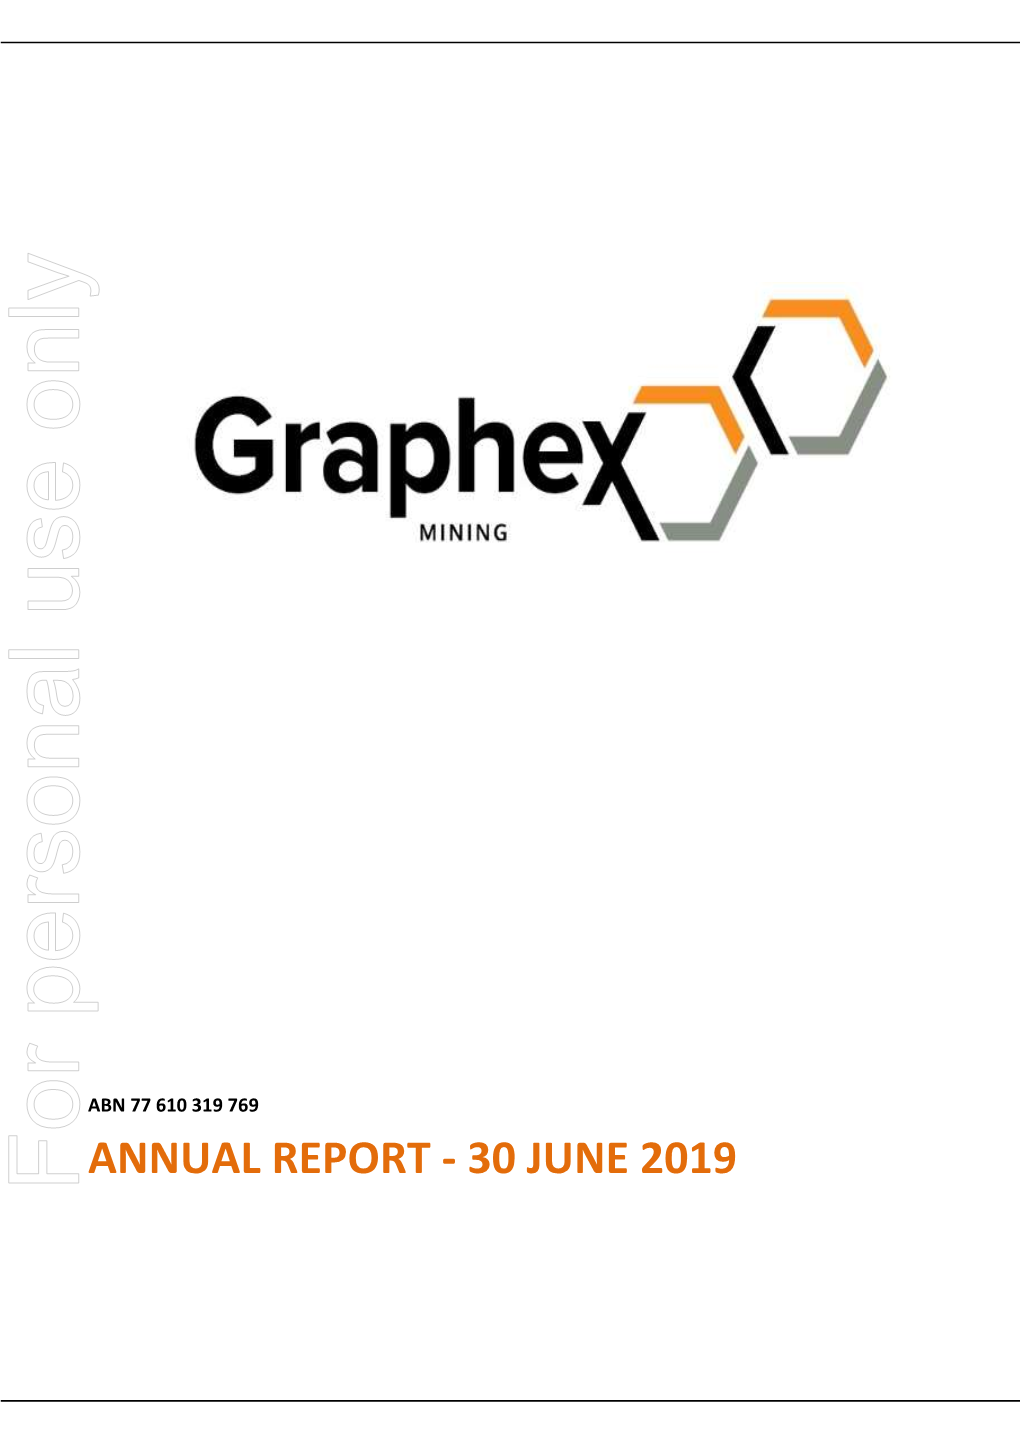 2019 Annual Report for Graphex Mining Limited